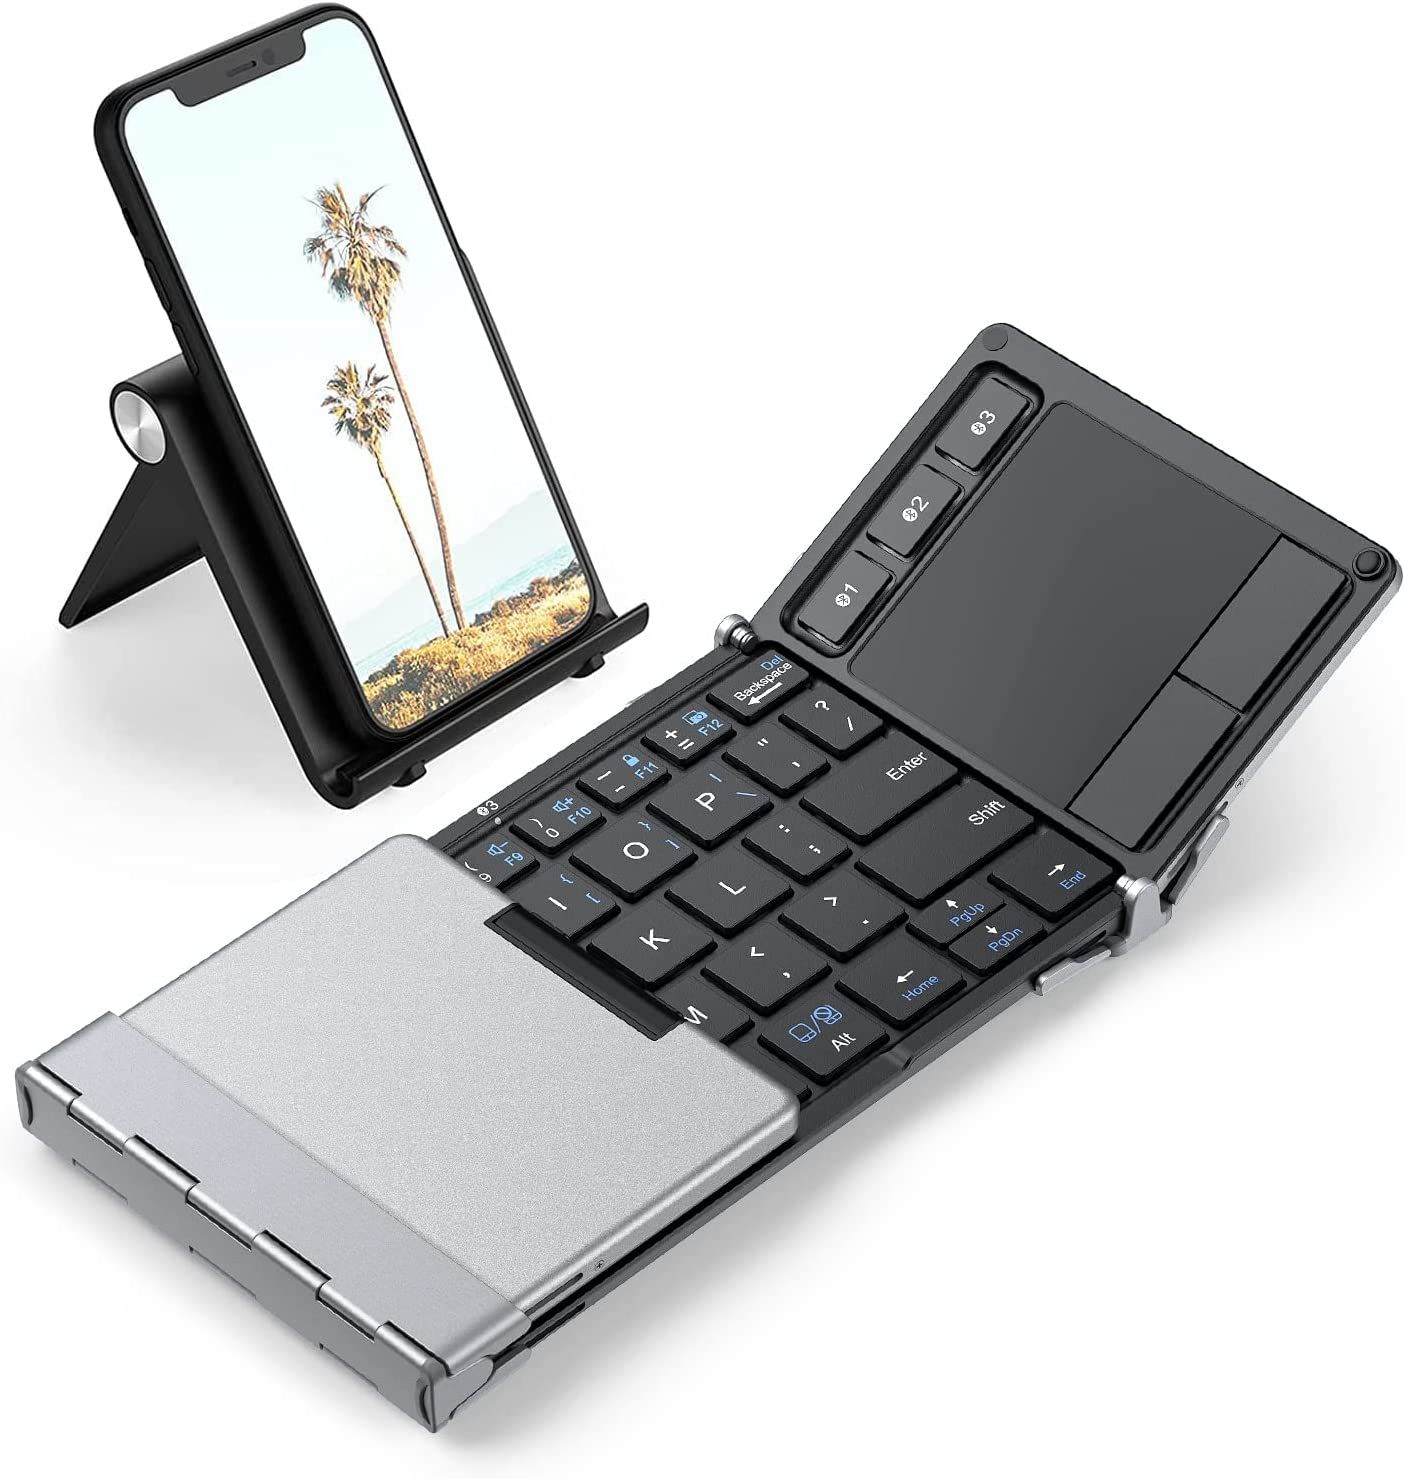 iClever Foldable Keyboard (BK08) with the left portion folded in, the trackpad fully displayed, and the included bonus kickstand on display with a phone in it.